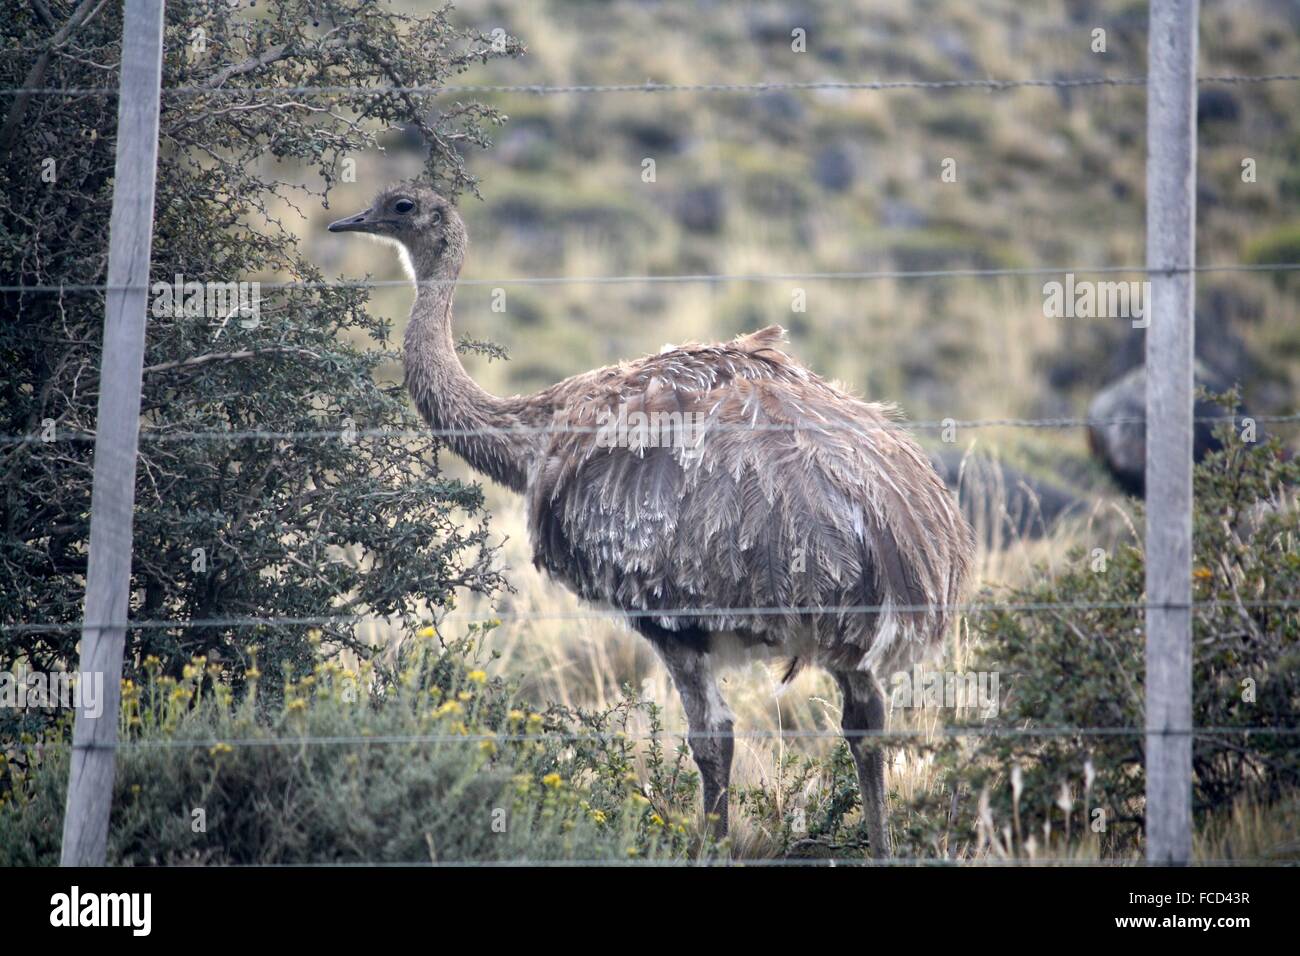 Captive Ostrich Beyond A Fence In A Green Area Stock Photo